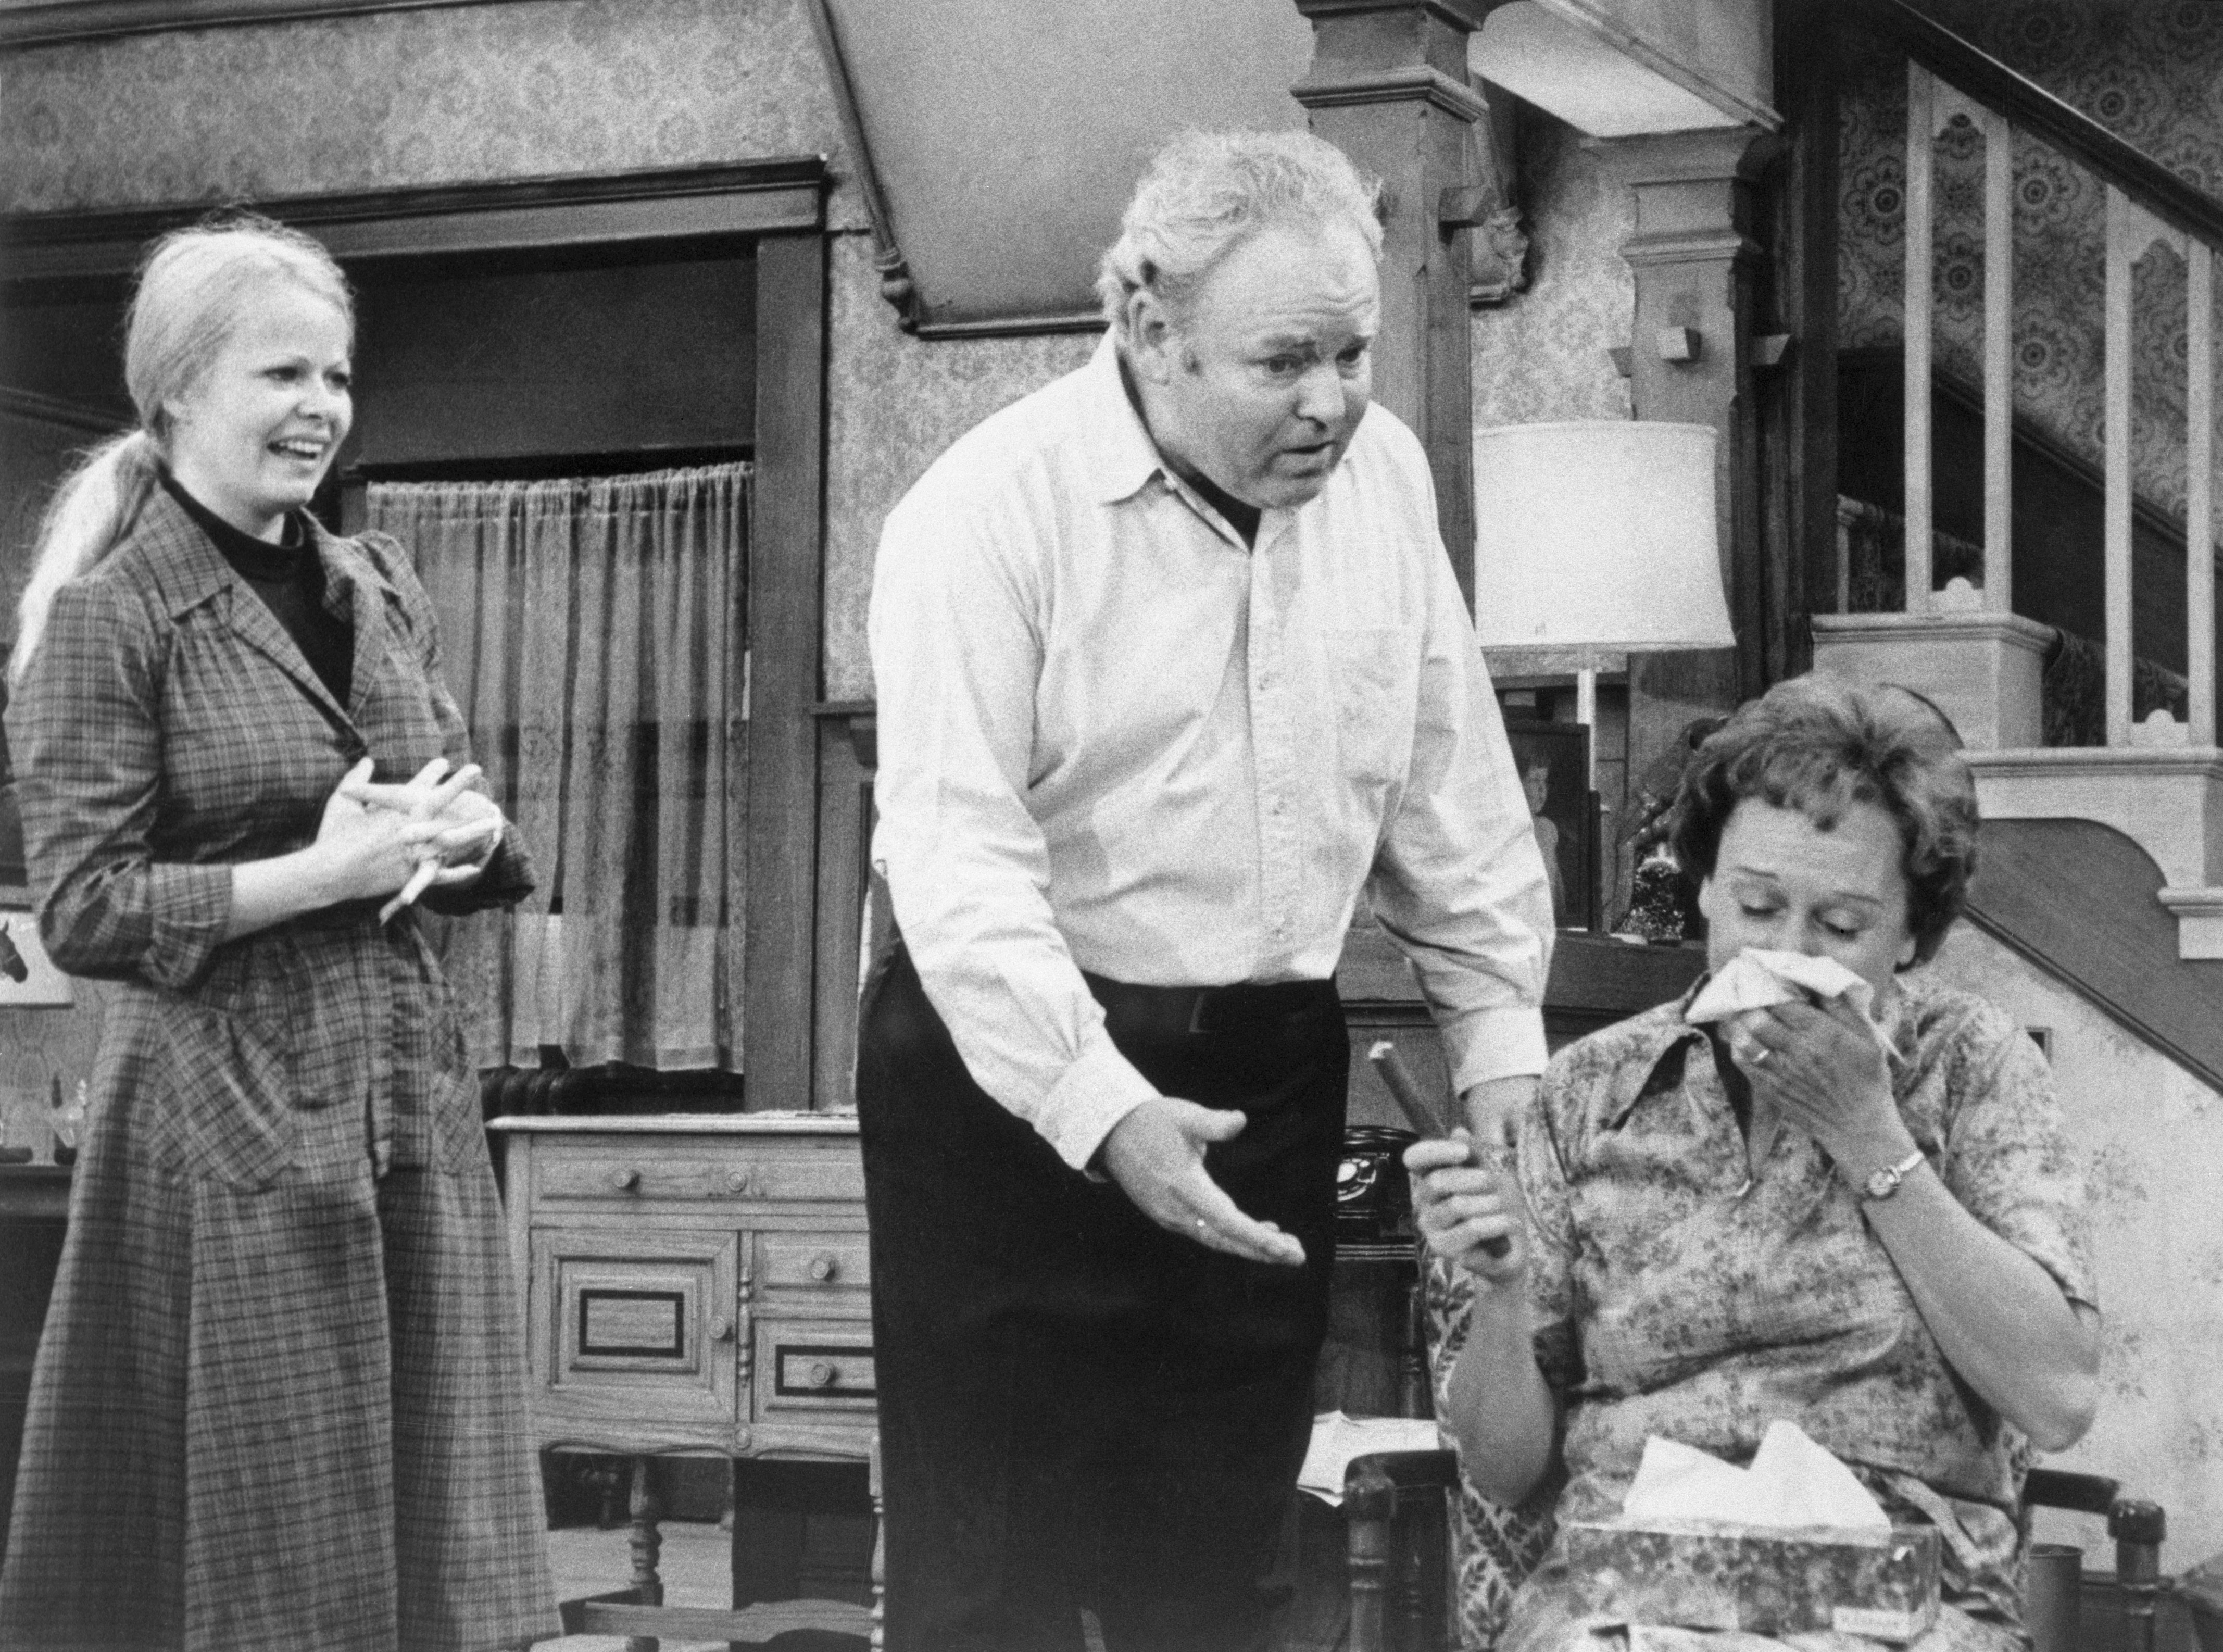 Archie Bunker (Carroll O'Conner) is arrested in the middle of a speech as he and his tearful, long-suffering wife Edith (Jean Stapleton) learn that their daughter Gloria (Sally Struthers) is having a baby.  |  Source: Getty Images